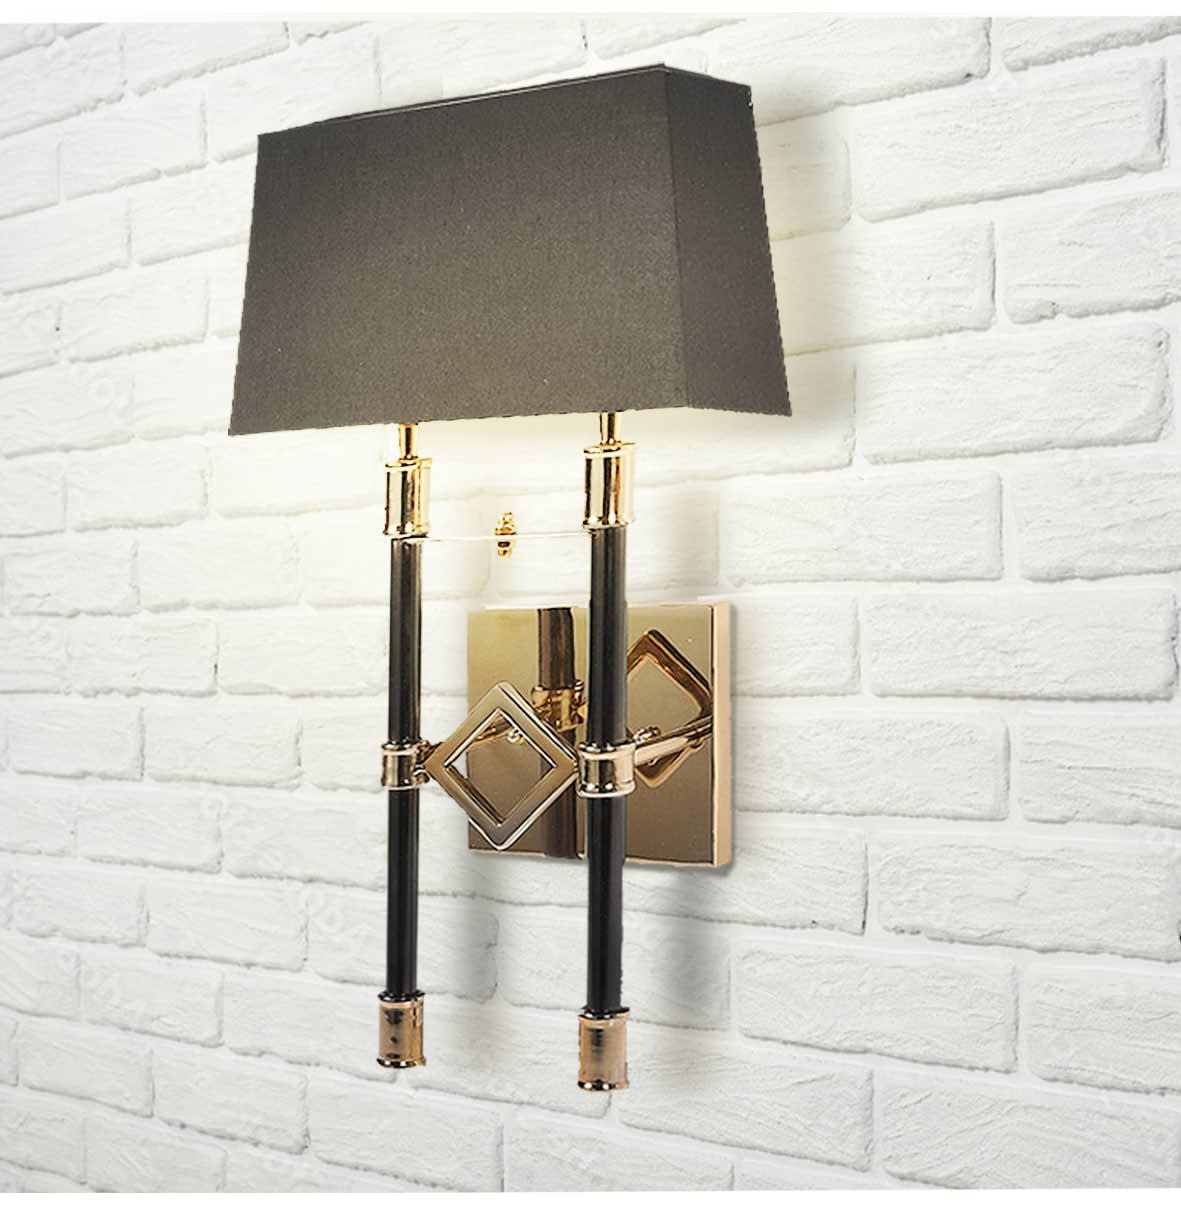 Double Gold Wall Light